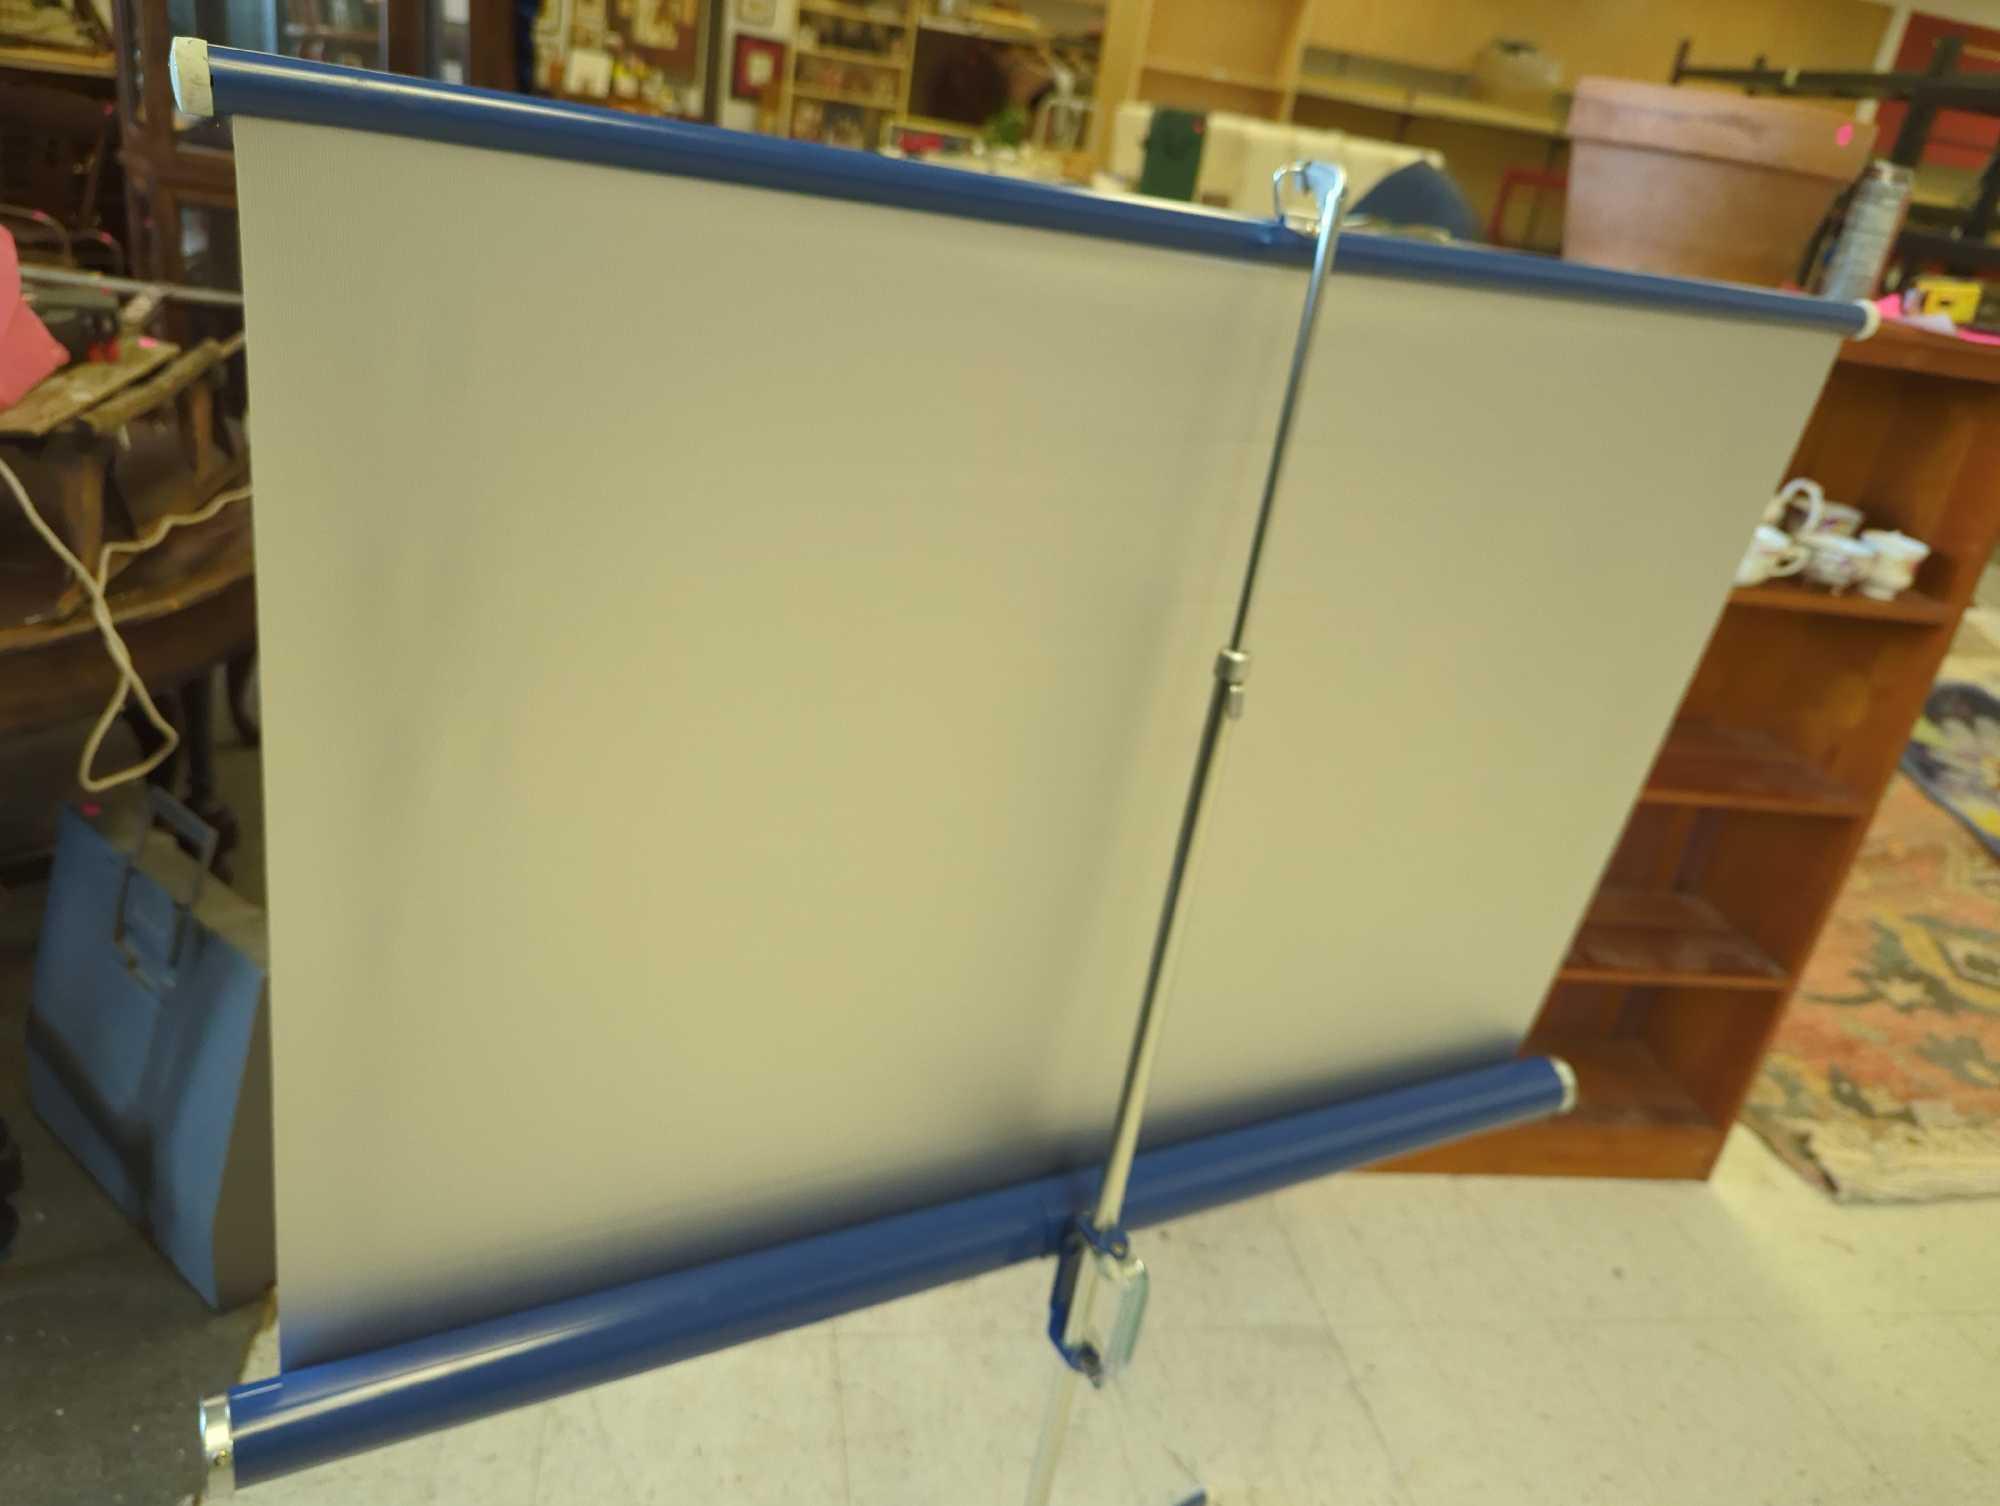 Old Style Da-Lite Professional Silver Flyer Projection Screen in Blue, Approximate Dimensions - 51"